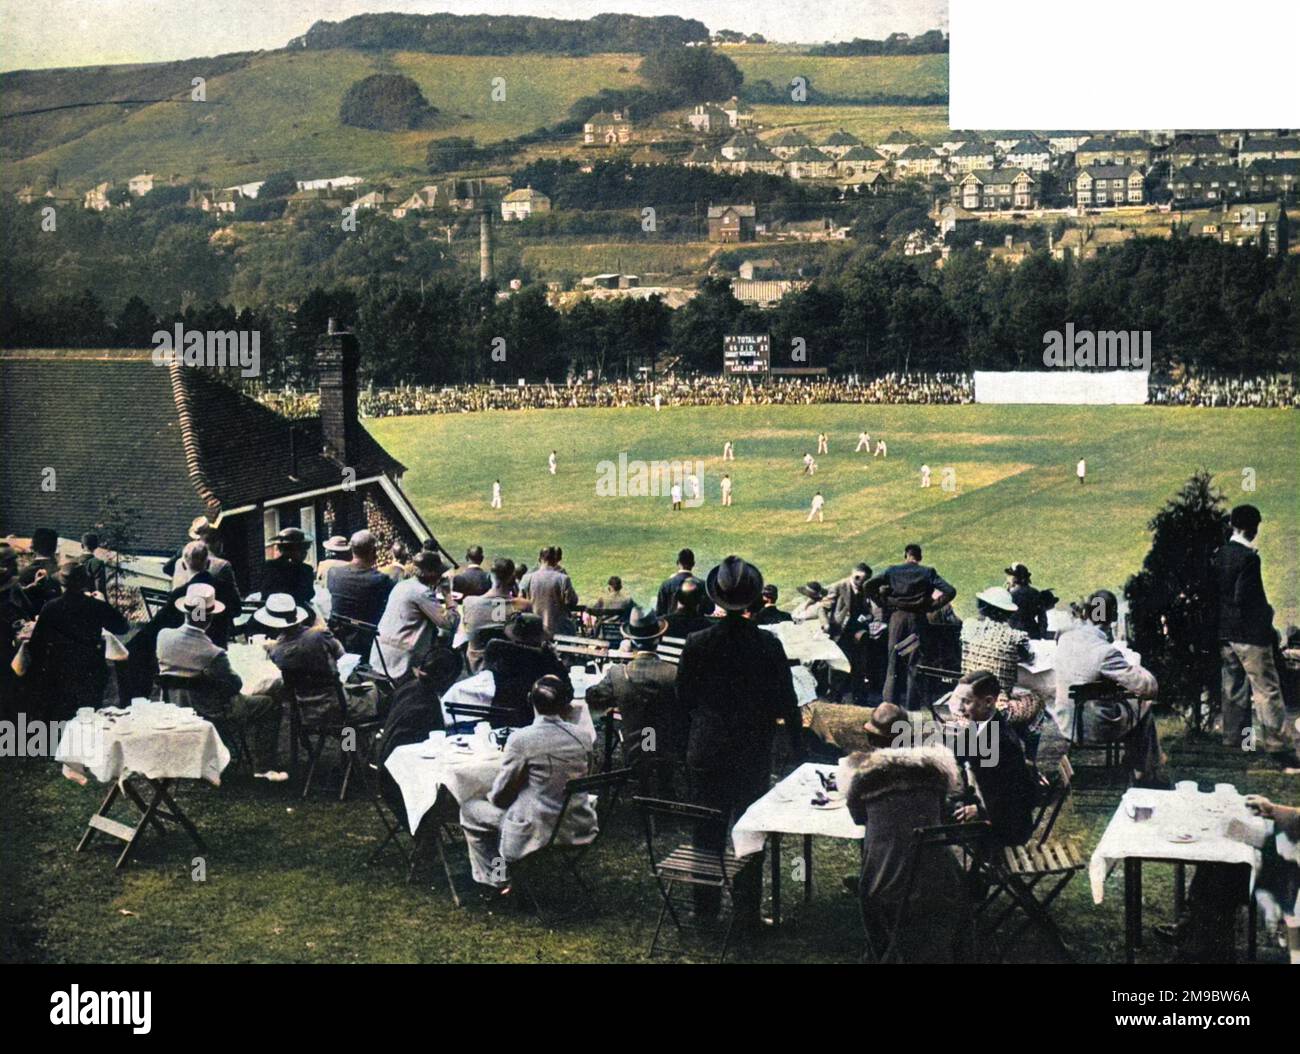 The lovely Crabble cricket ground at Dover, Kent, which was used by Kent County Cricket Club from 1907 to 1976. The match in progress is between Kent and Yorkshire, which was won easily by the visitors who went on to win the County Championship that season. Stock Photo